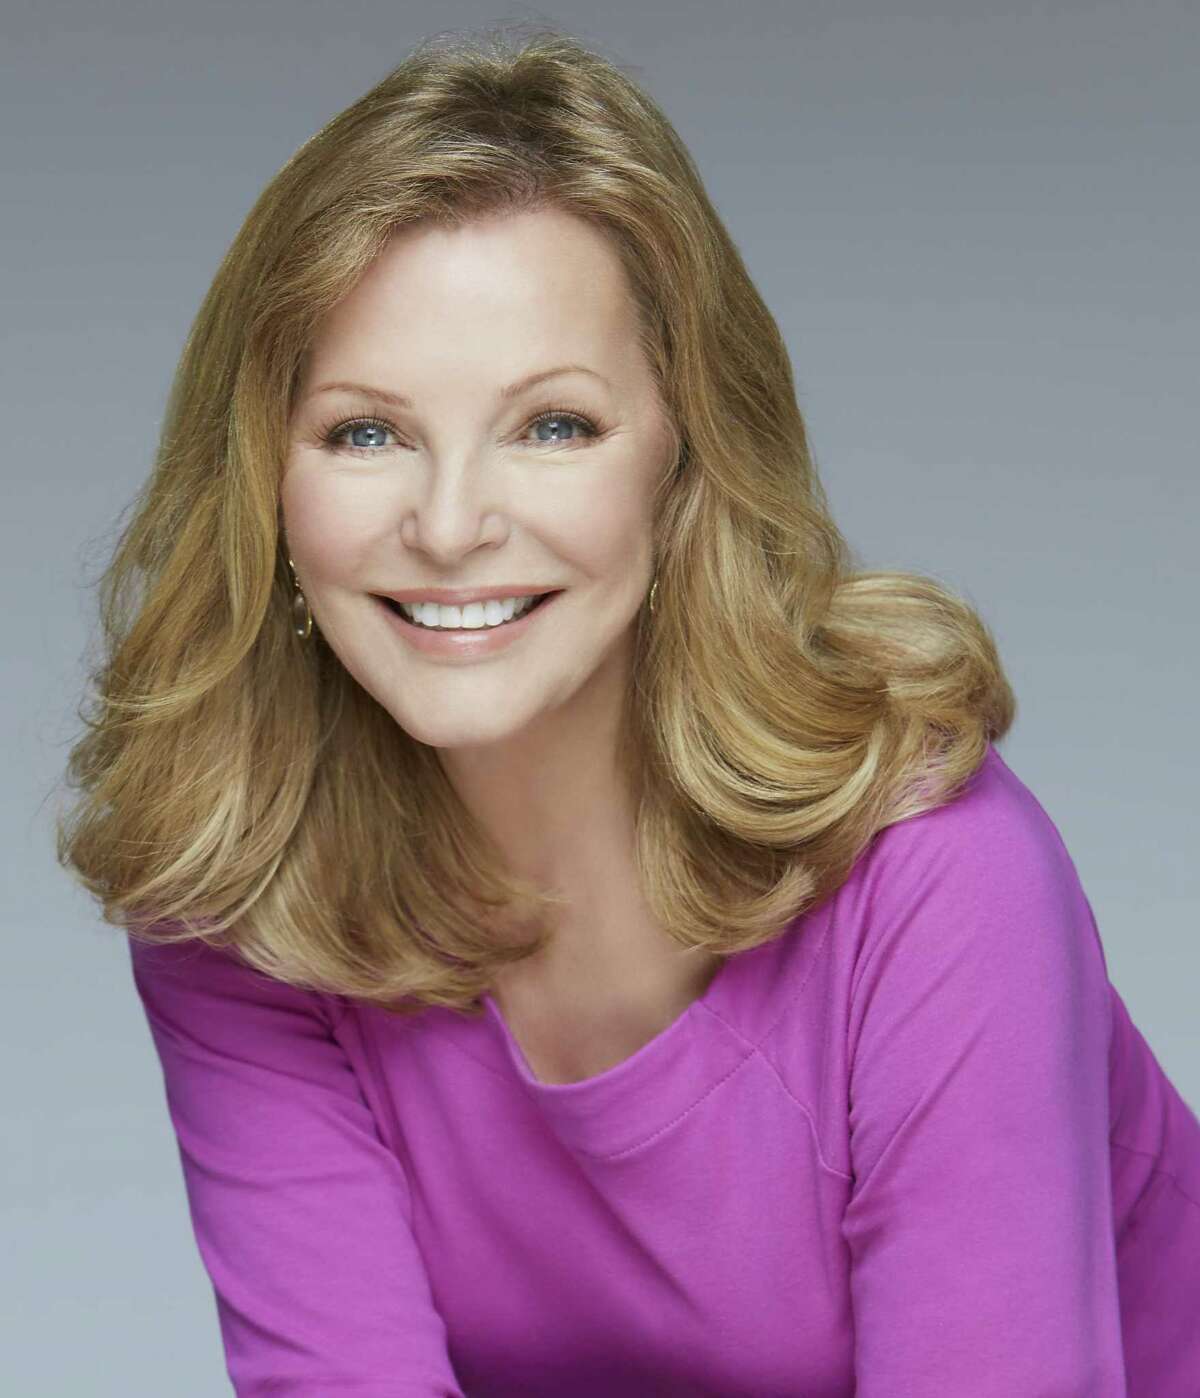 Cheryl Ladd, former star of "Charlie's Angels" has been name...